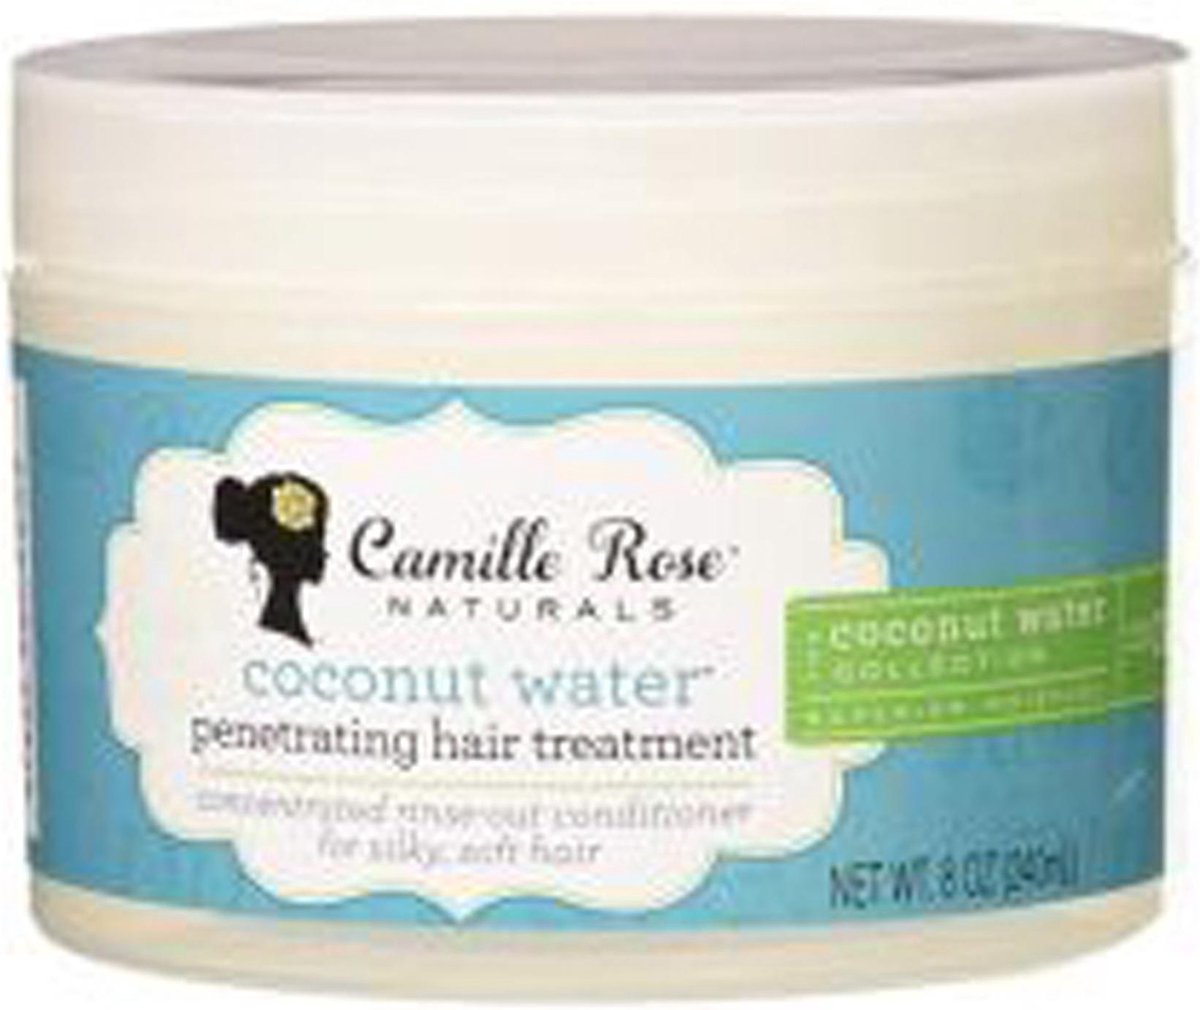 Camille Rose Naturals Coconut Water Penetrating Hair Treatment 240ml